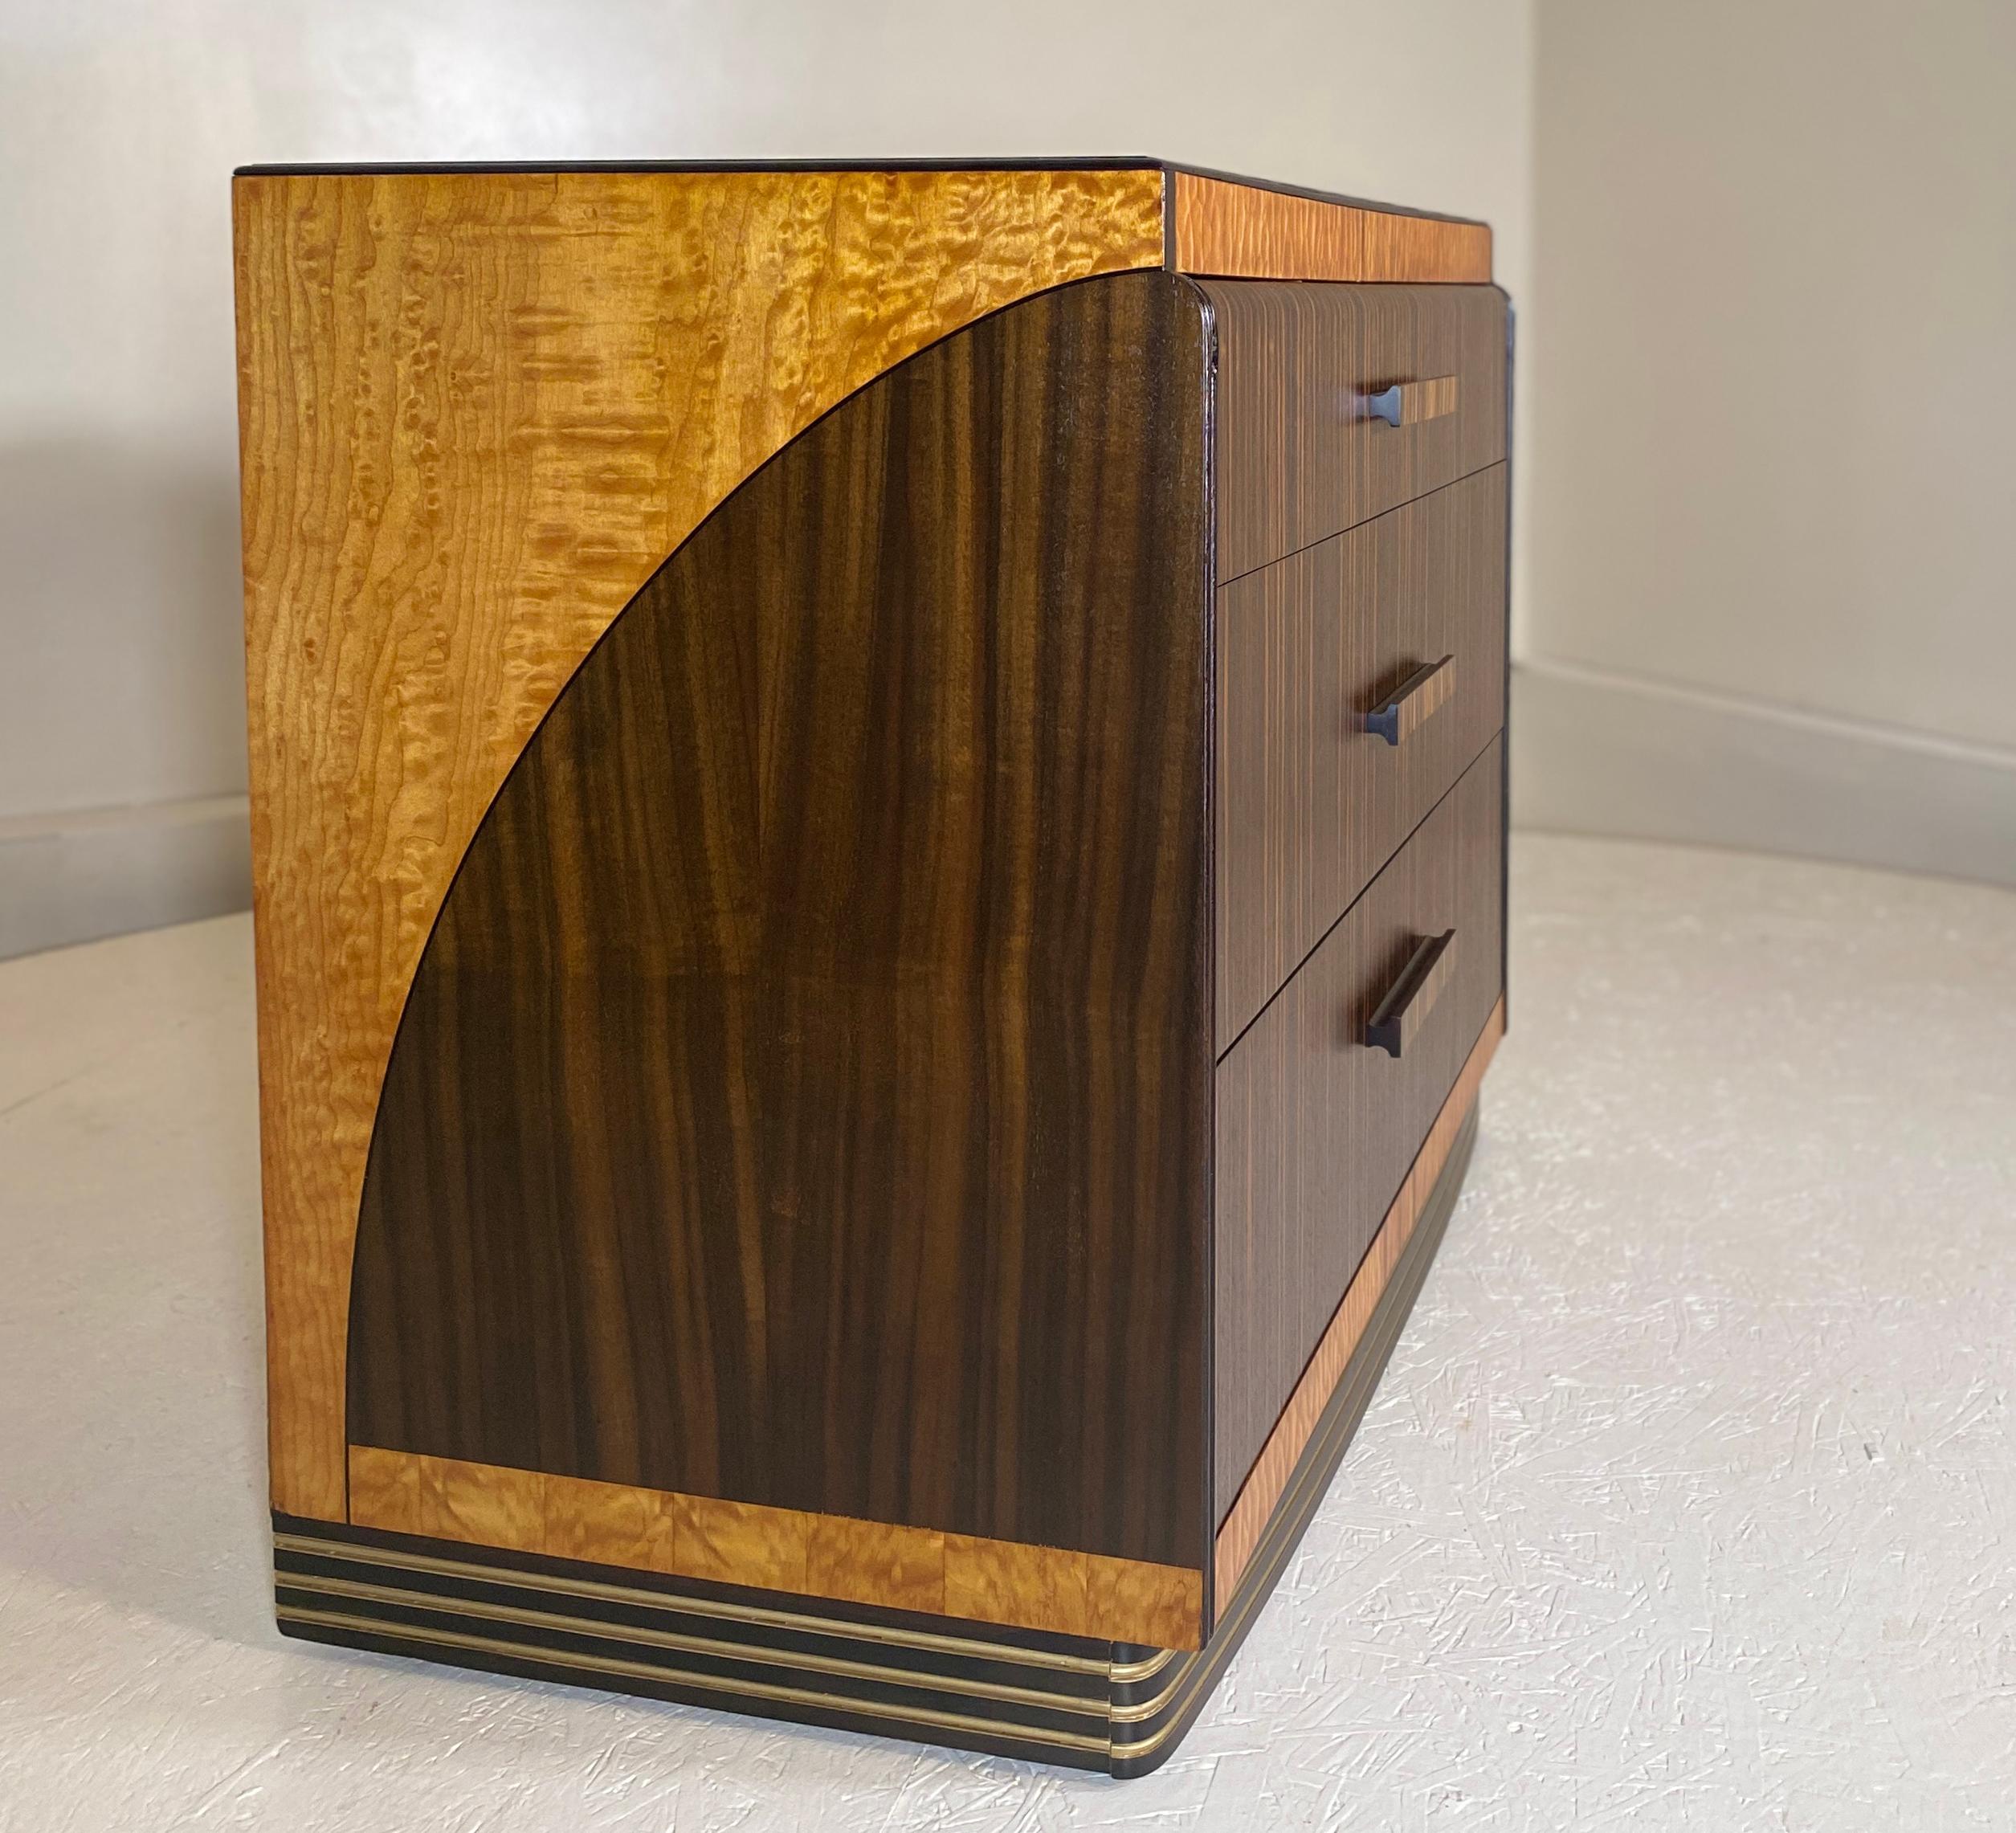 A unique and rare piece by Leo Jiranek circa 1930-1935 and signed. Produced with premium Macassar Ebony, Birdseye Maple, Mahogany and bakelite and original blue mirror glass silvered top. This unique dresser differs from the pieces seen by Leo